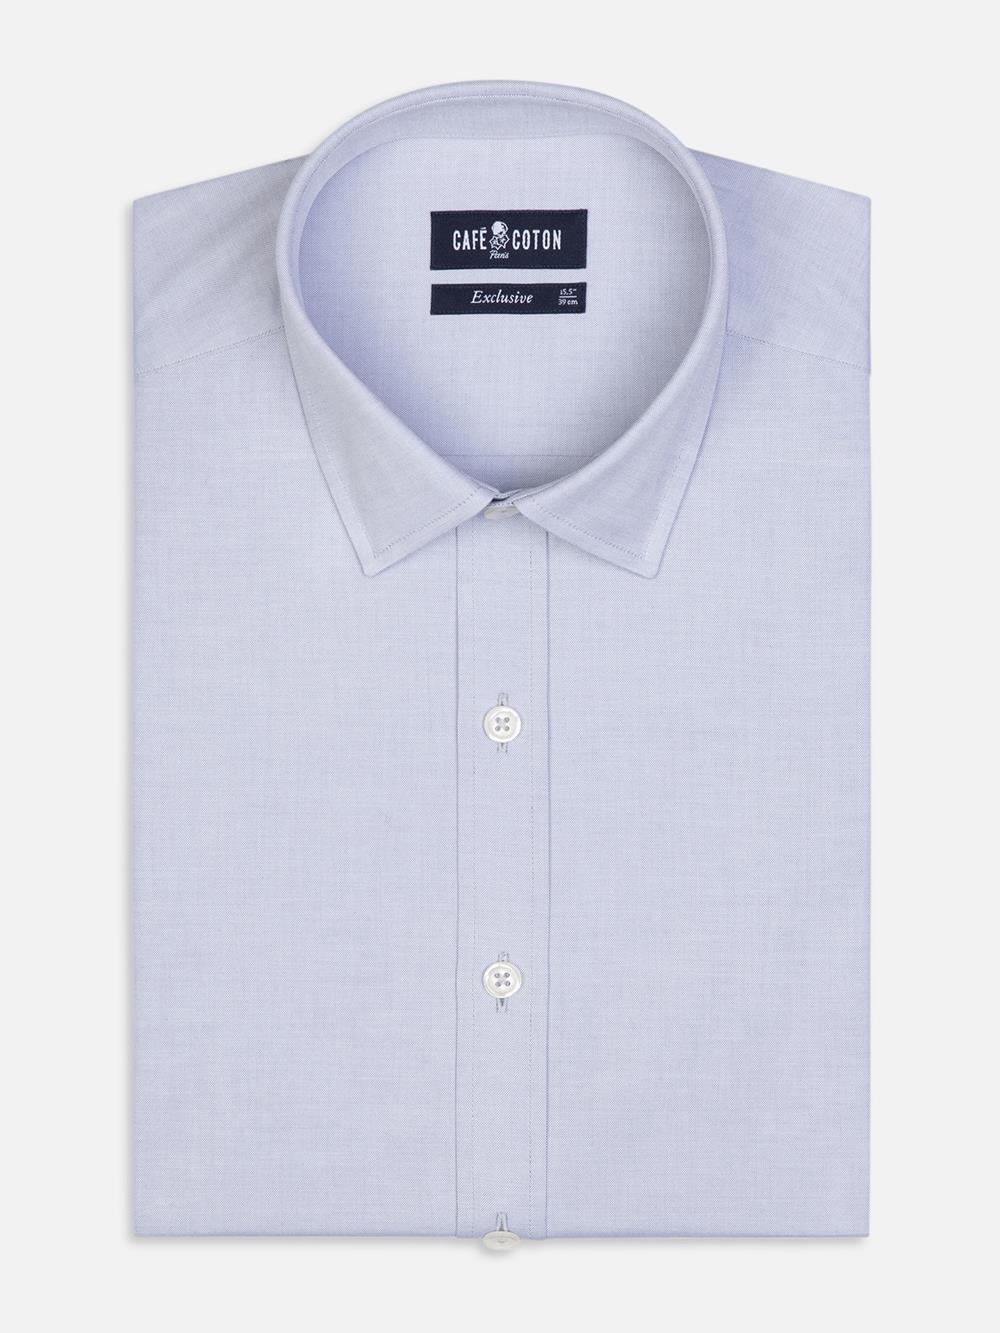 Grey pinpoint slim fit shirt - Small collar